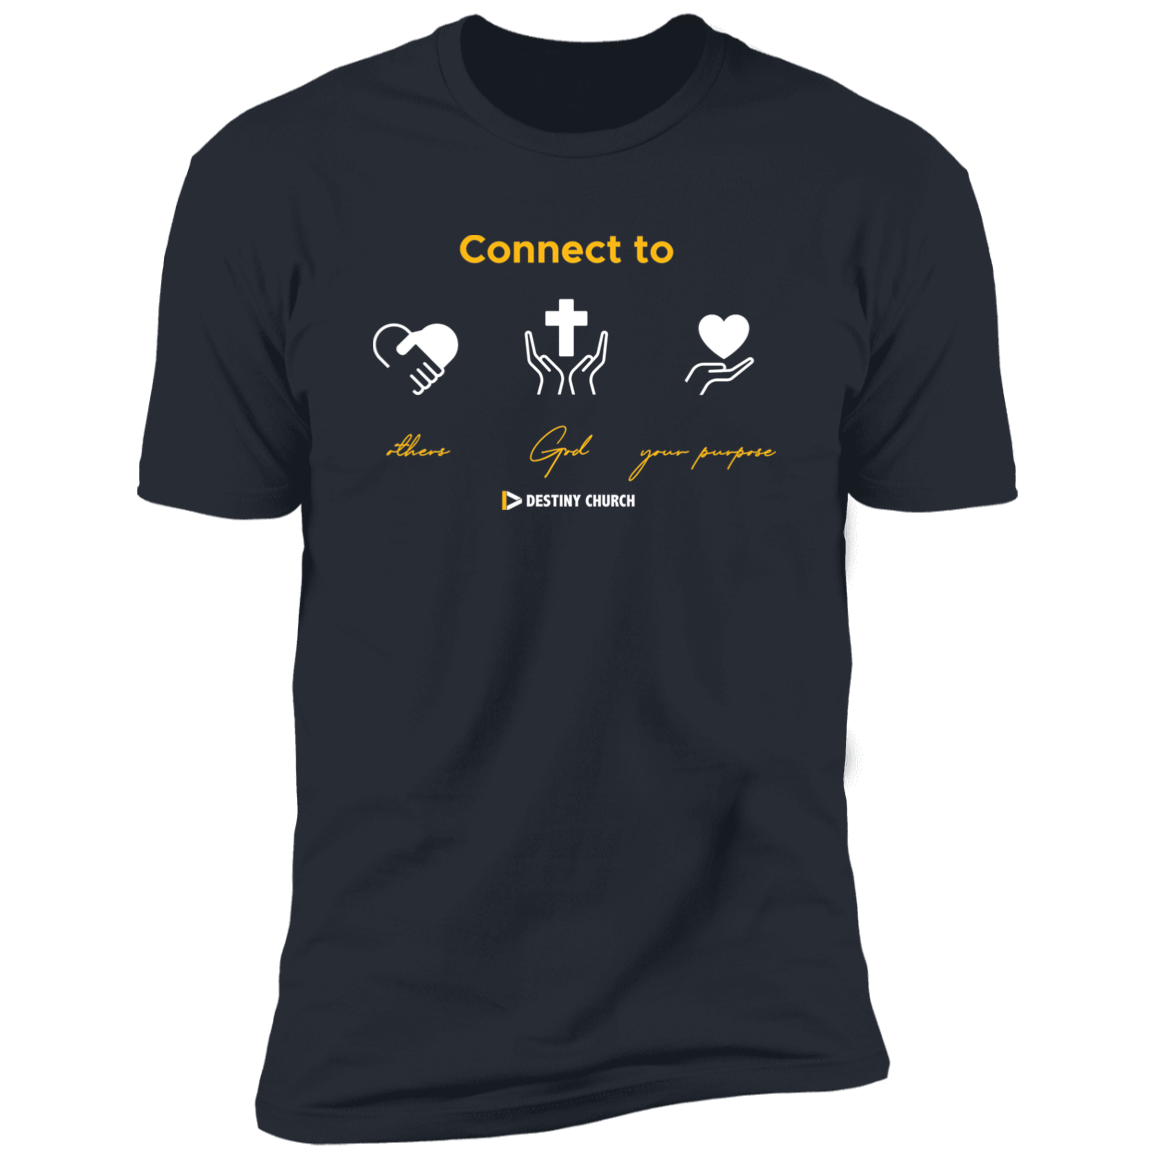 Connect To Destiny - Shirts